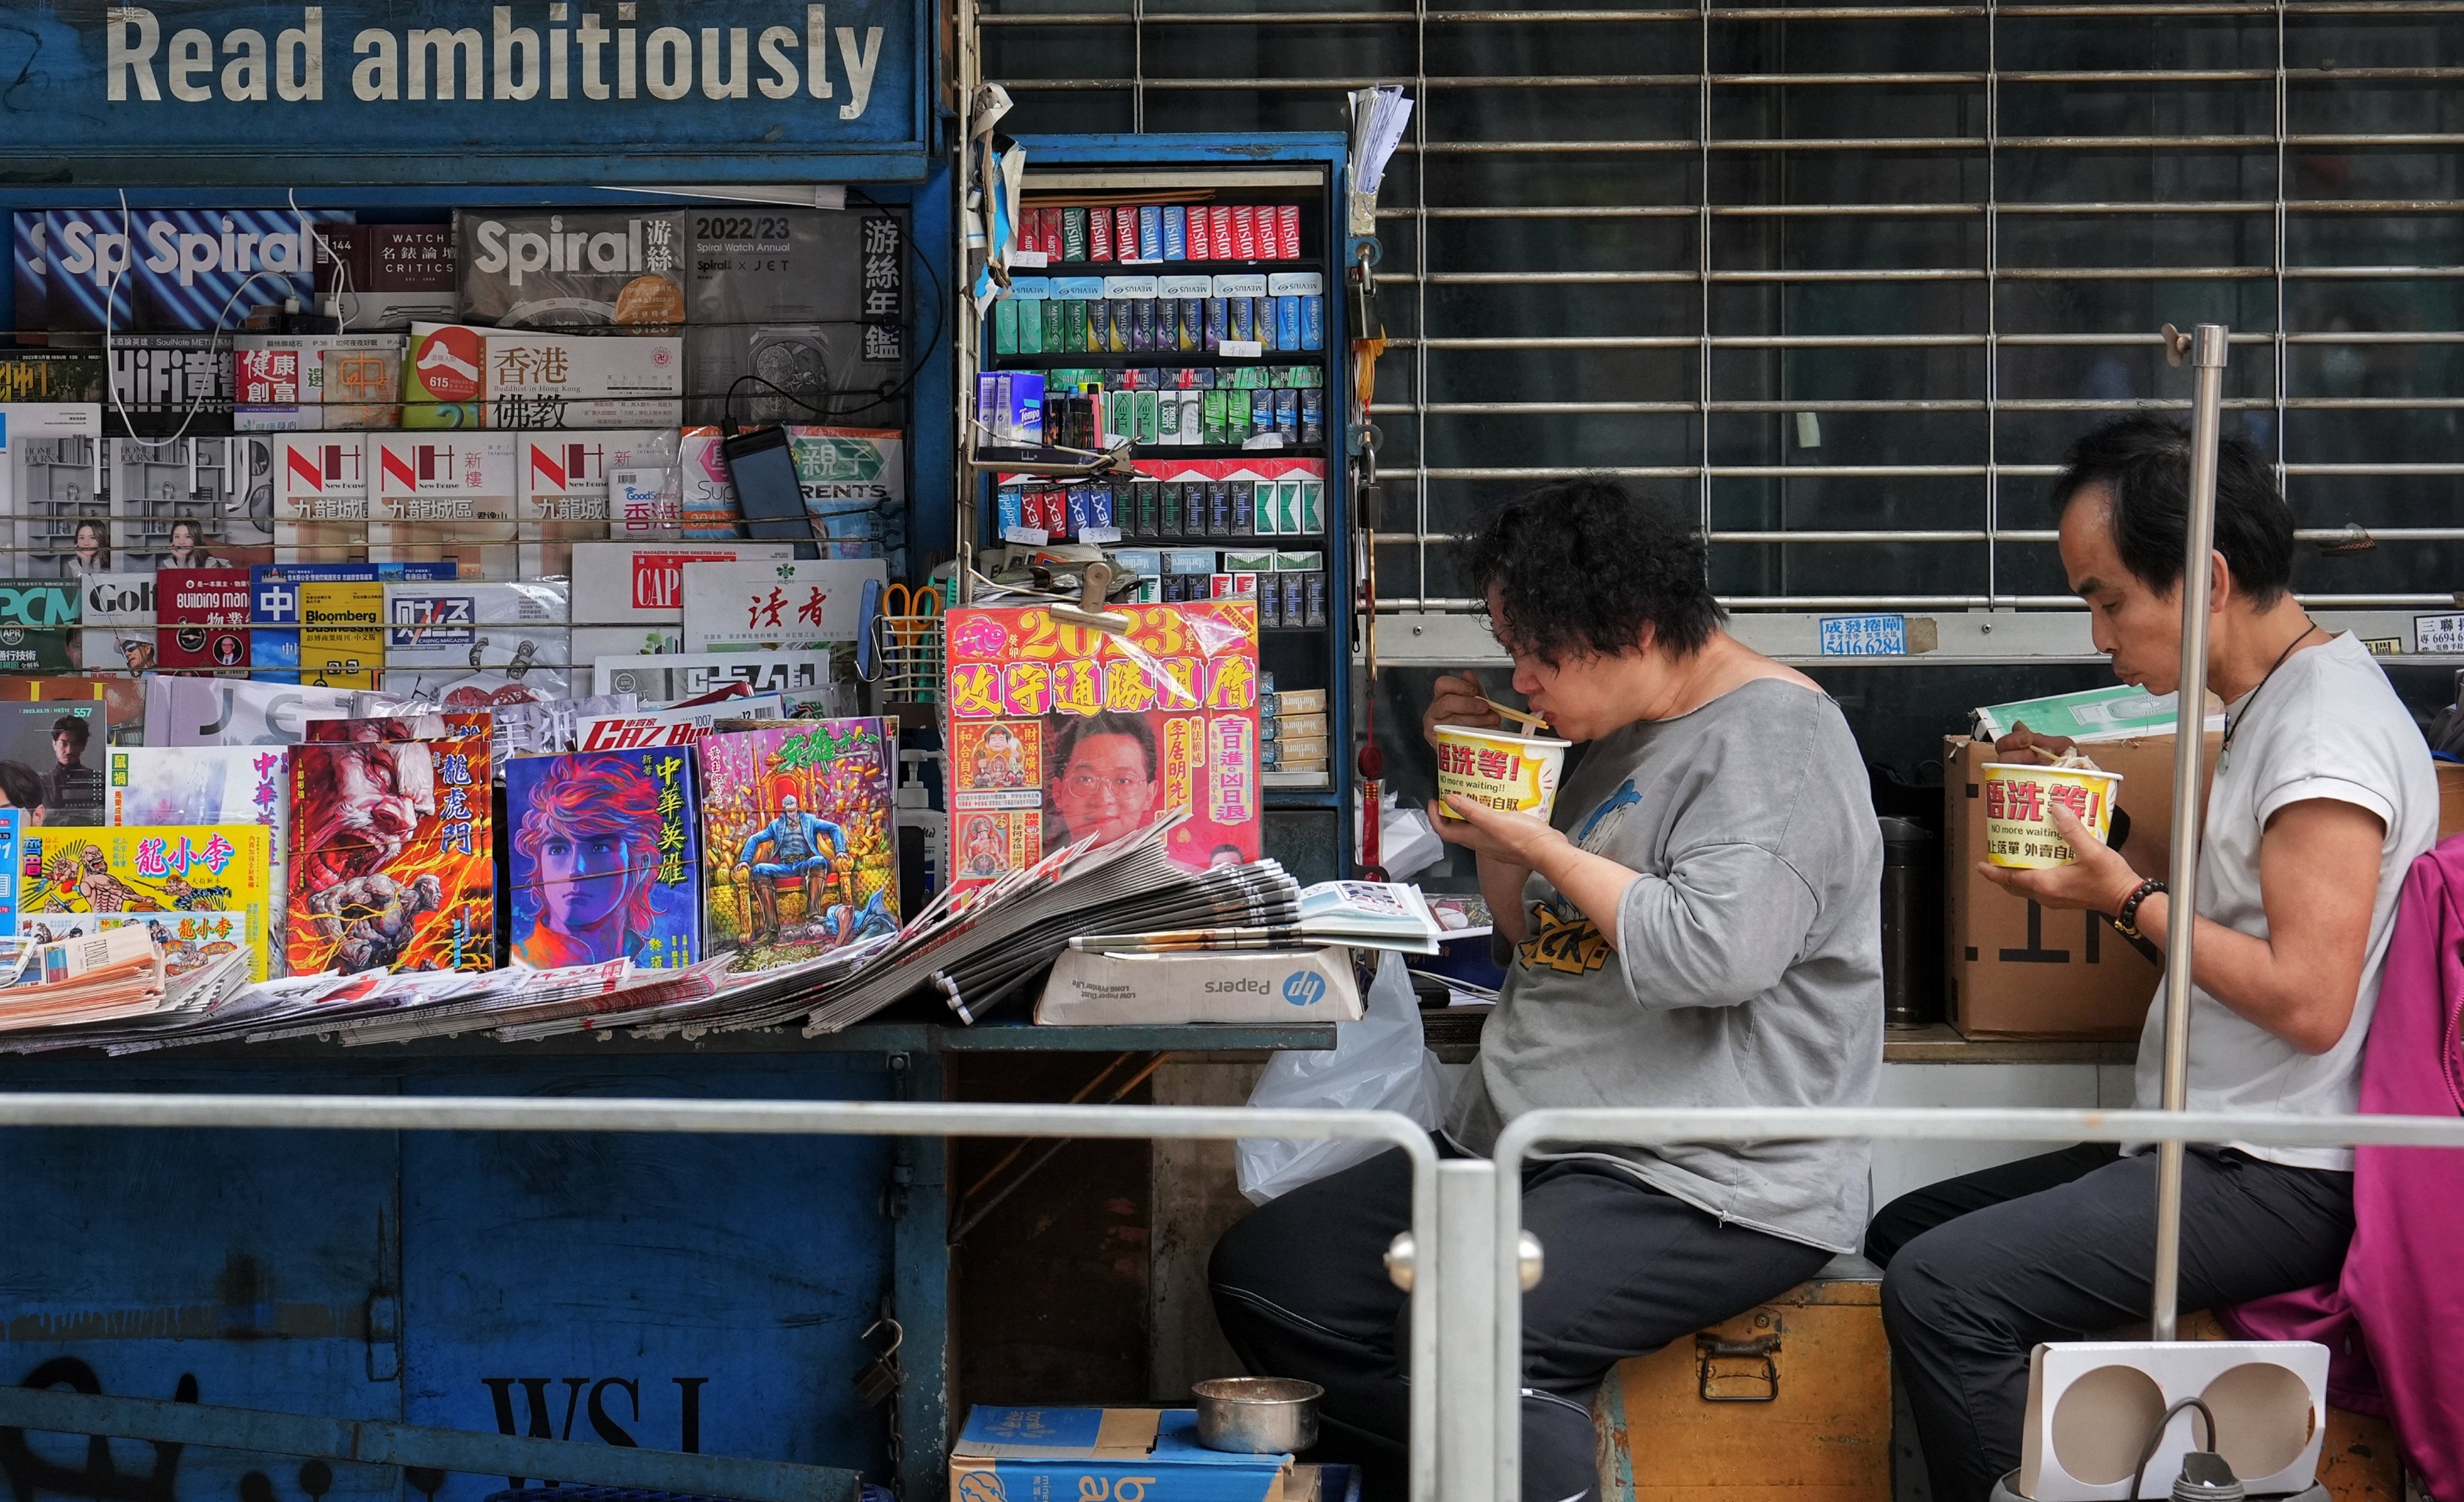 Stall keepers of a newspaper stand eating lunch in Central, Hong Kong, on March 23. Uncritical faith in media outlets may be misplaced today. Photo: Elson Li